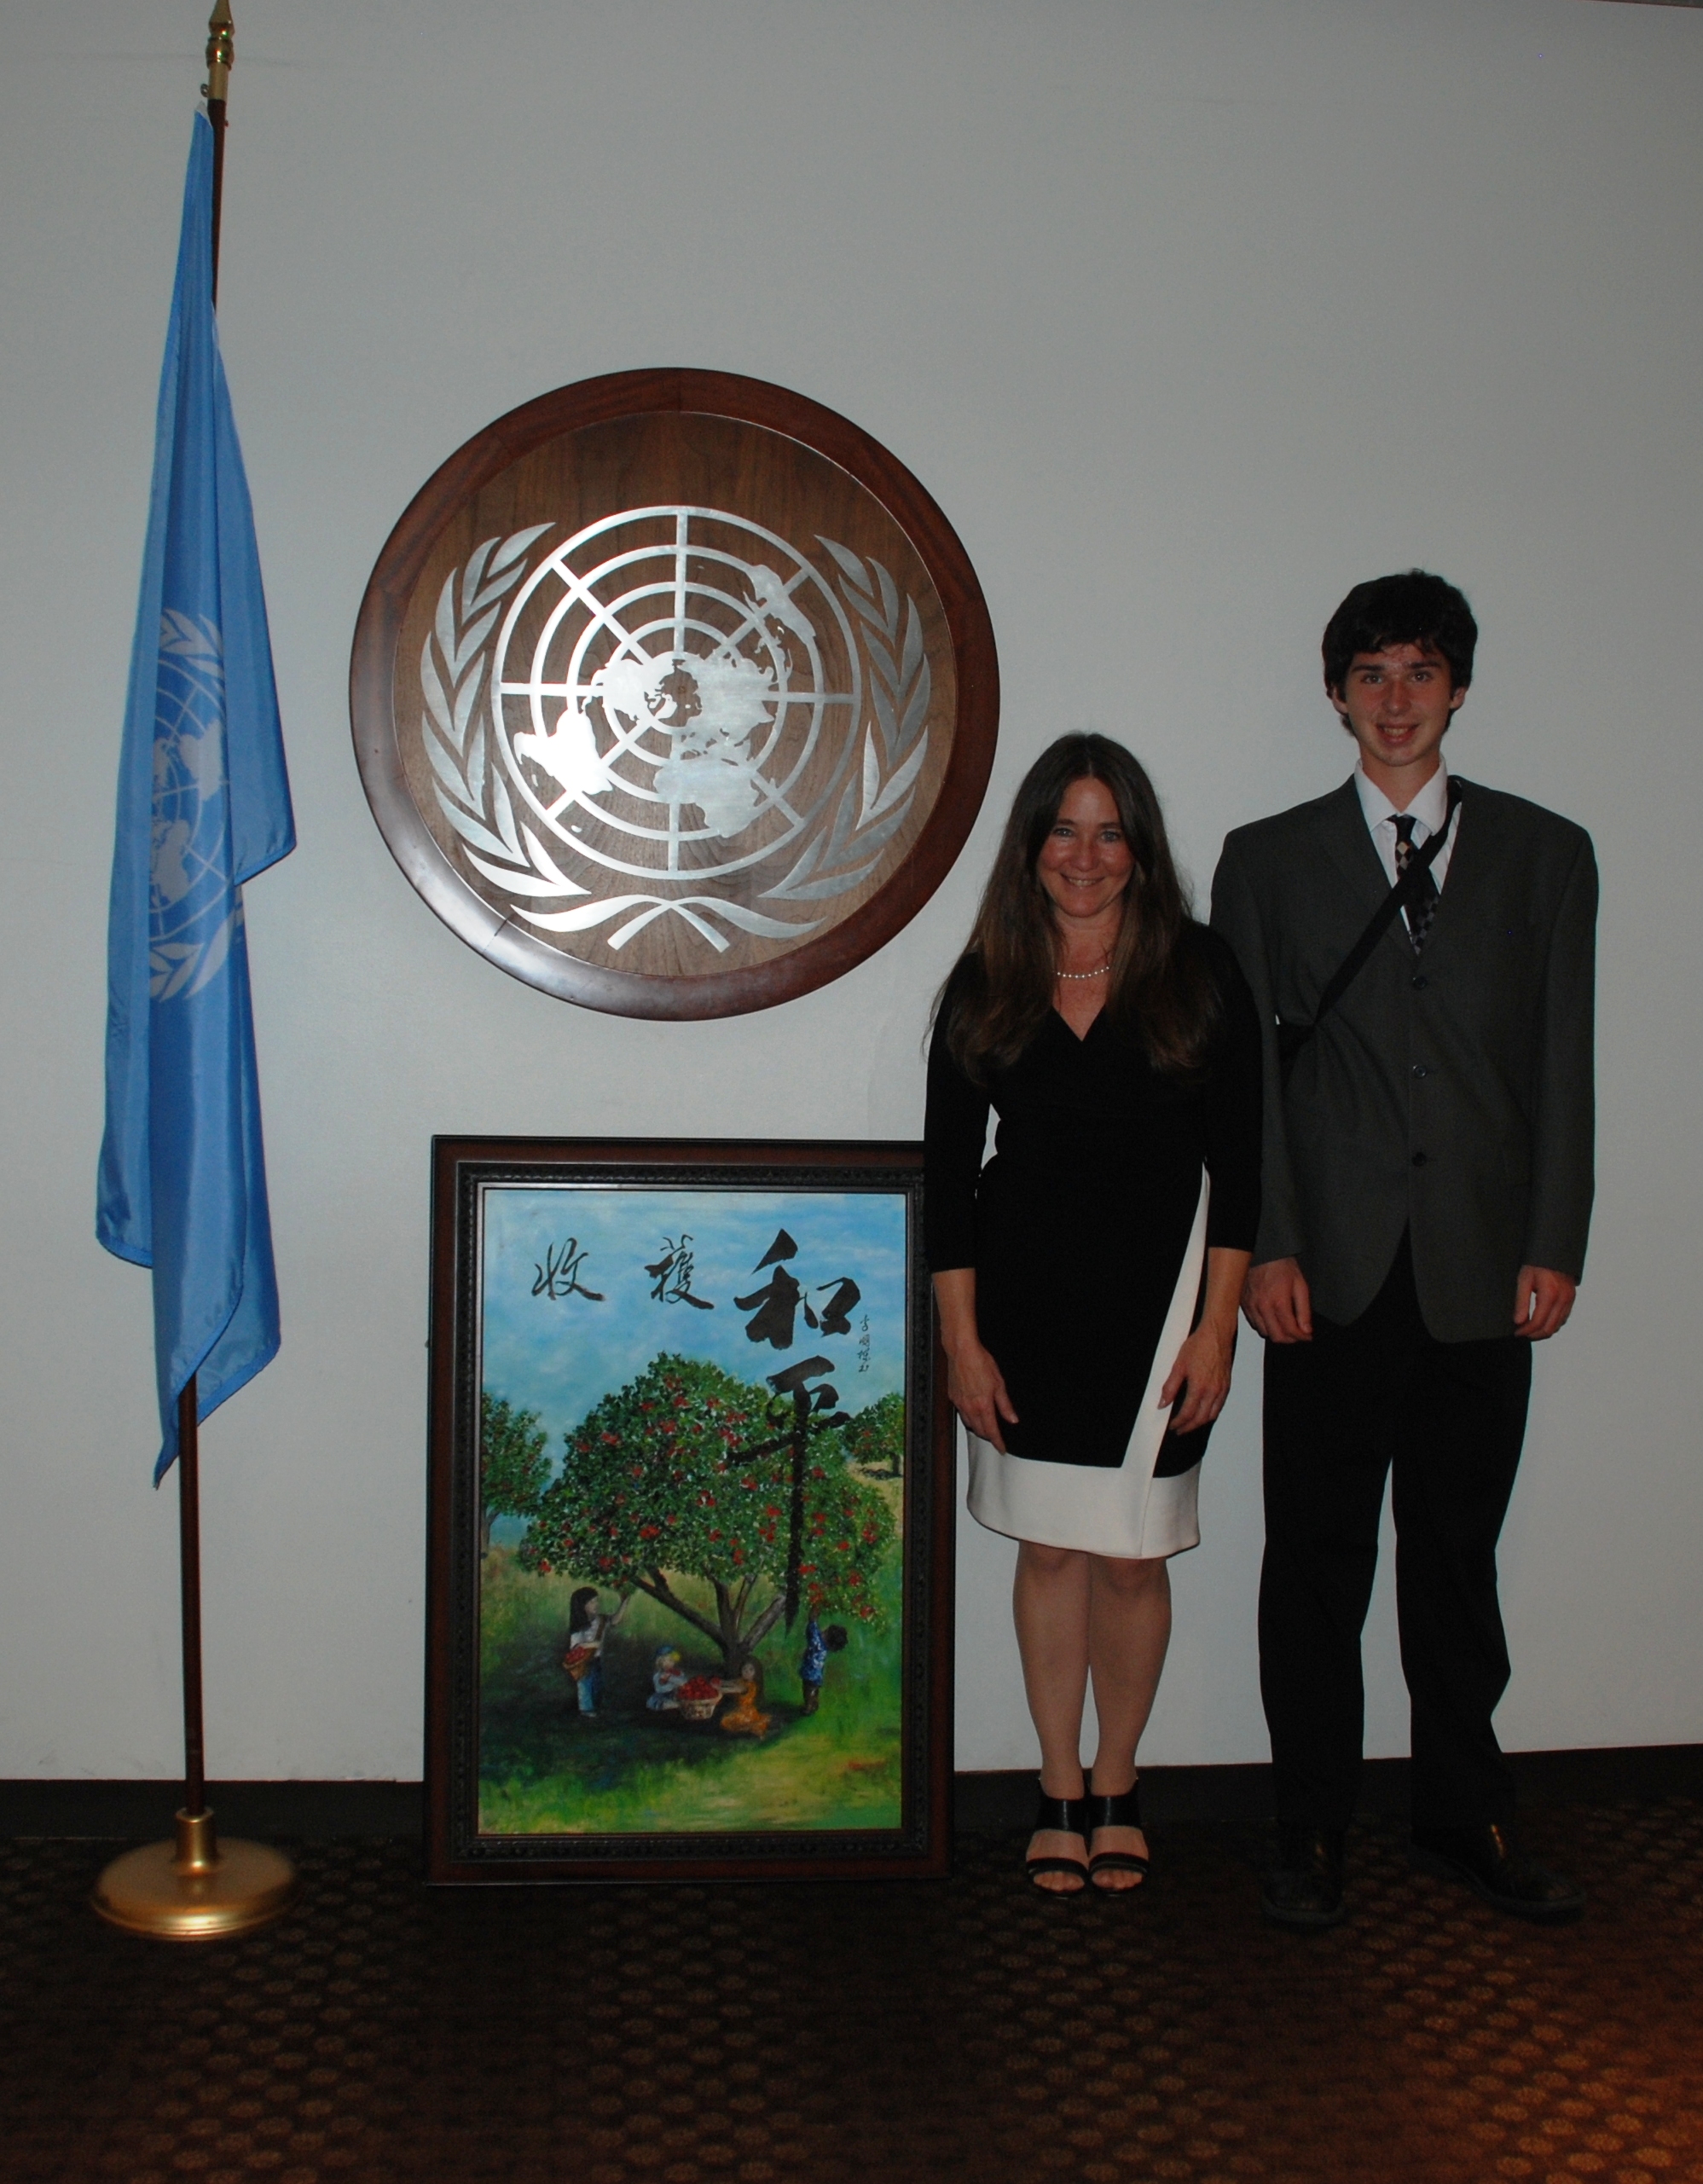 Debra Stasiak and her son Benjamin are shown here at the UNWG’s official calendar launch